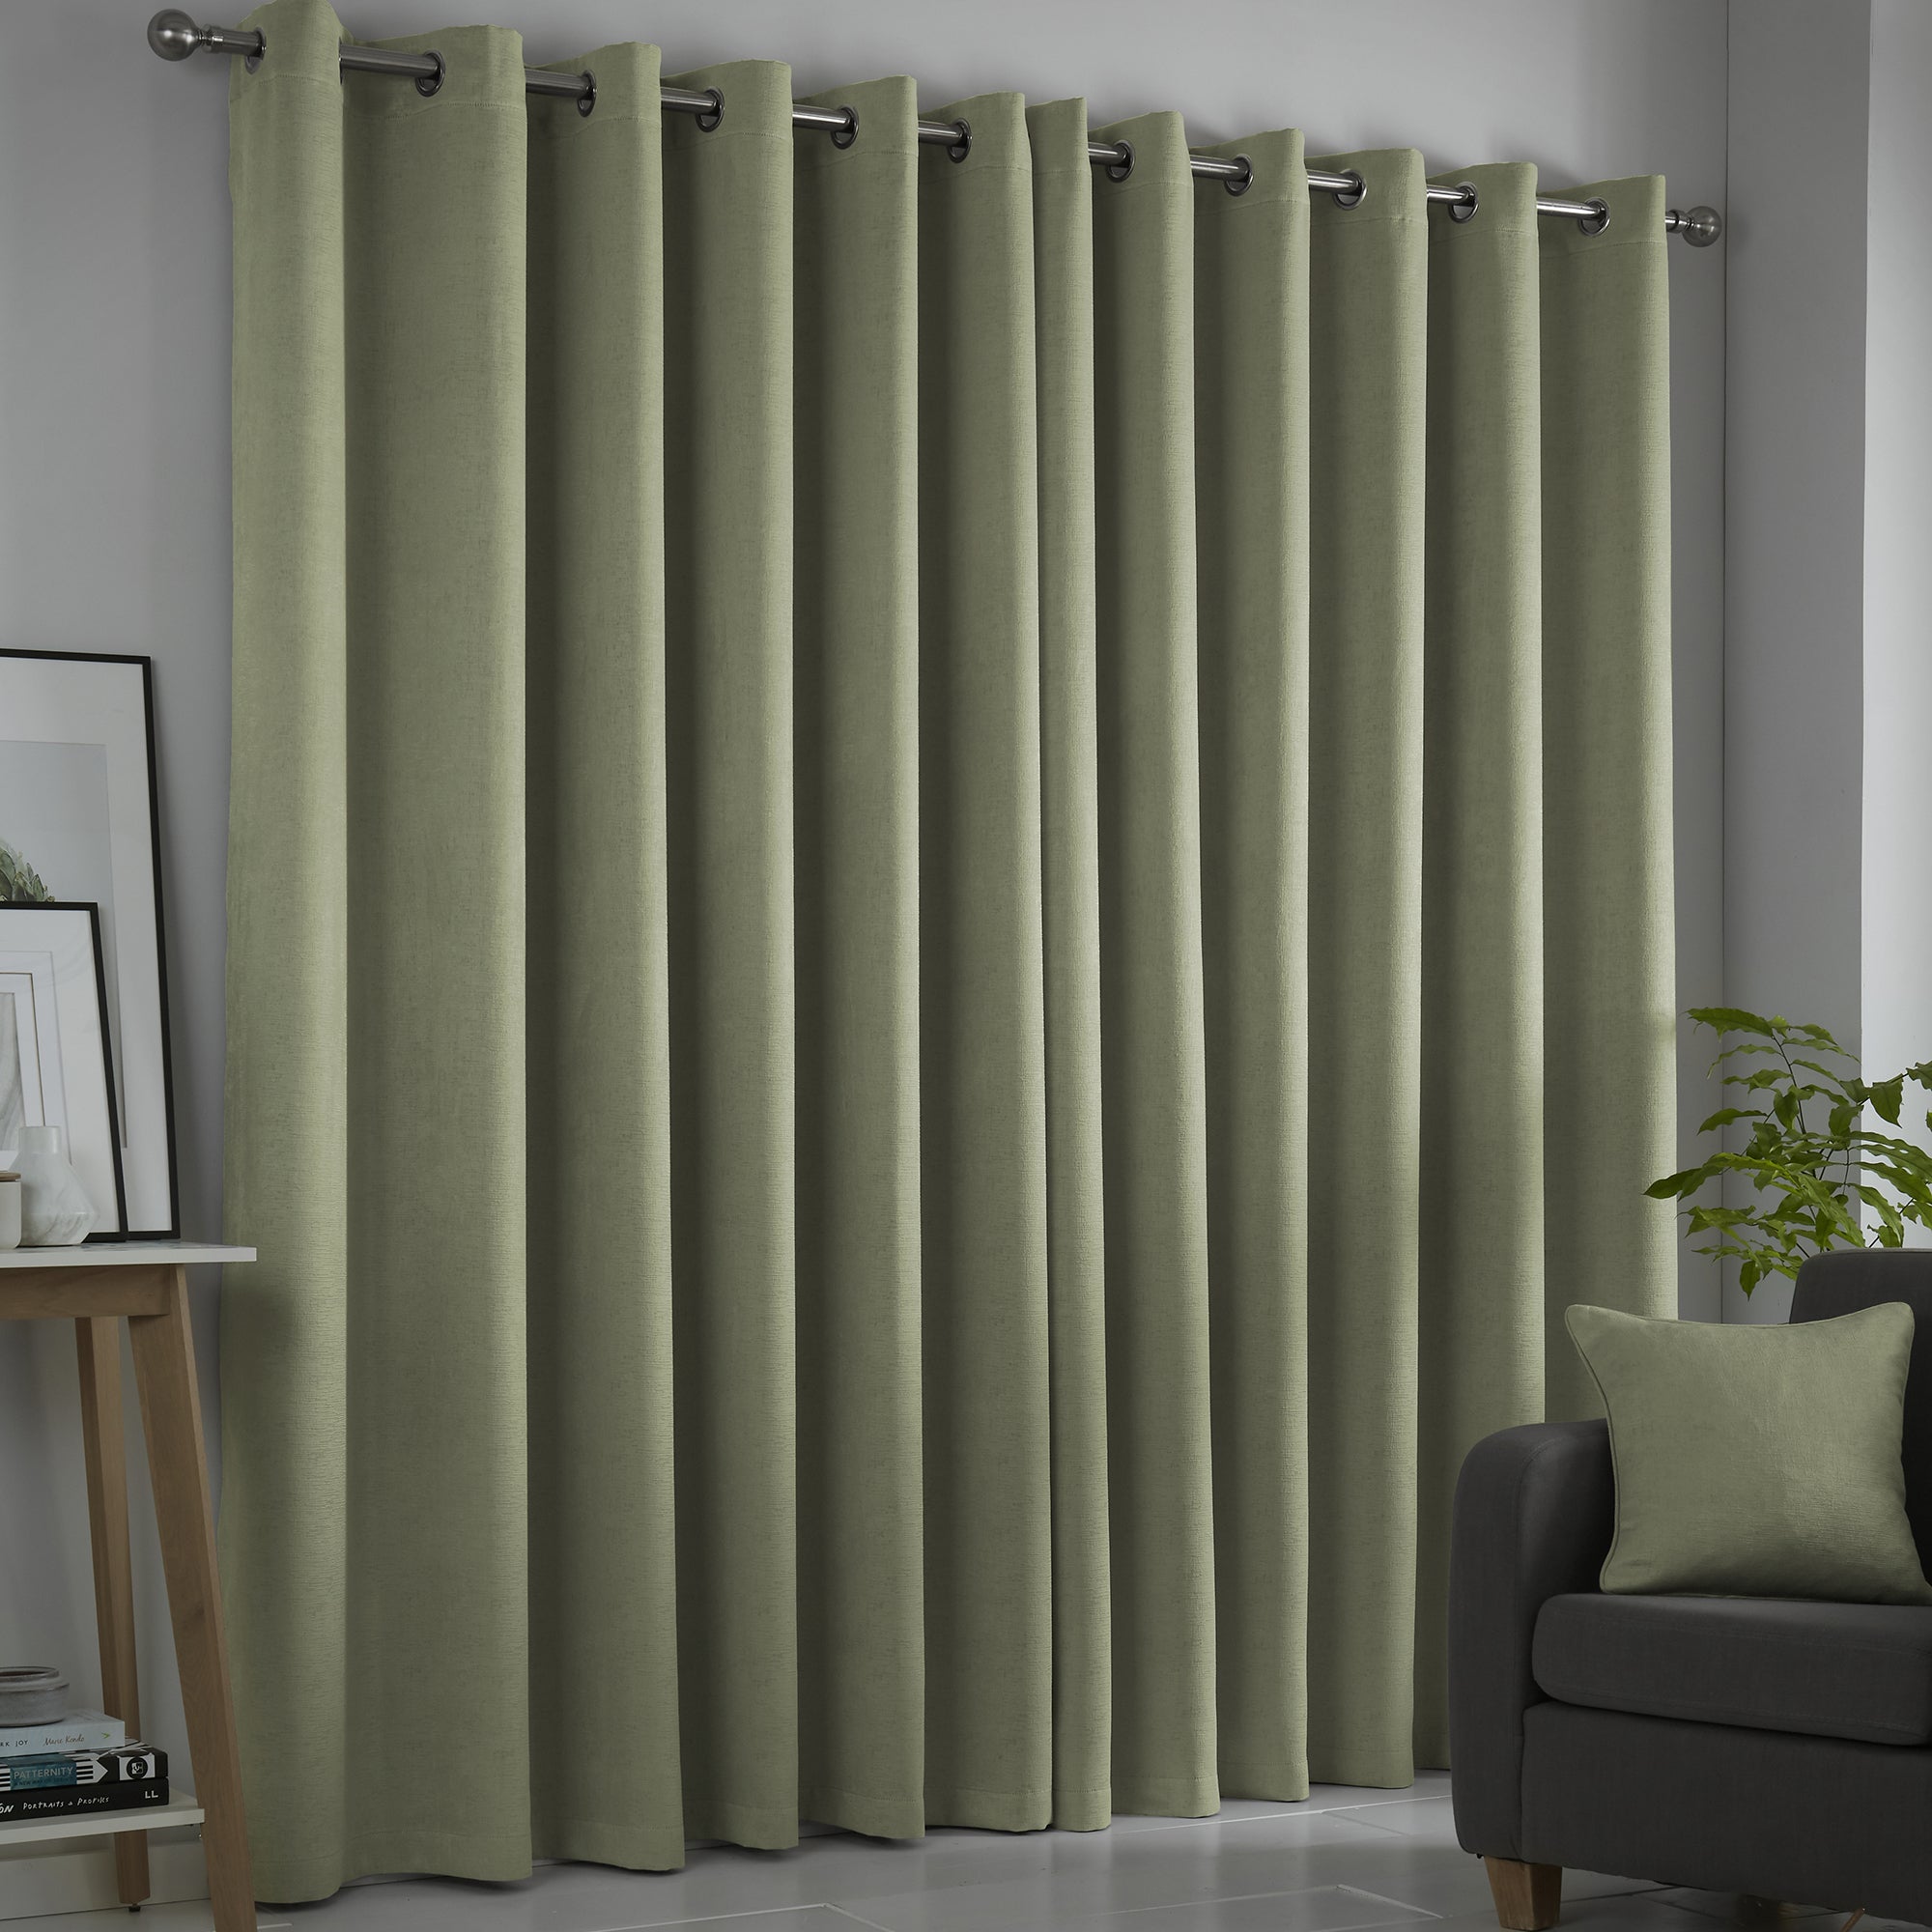 Strata - Blockout Pair of Eyelet Curtains in Green - by Fusion